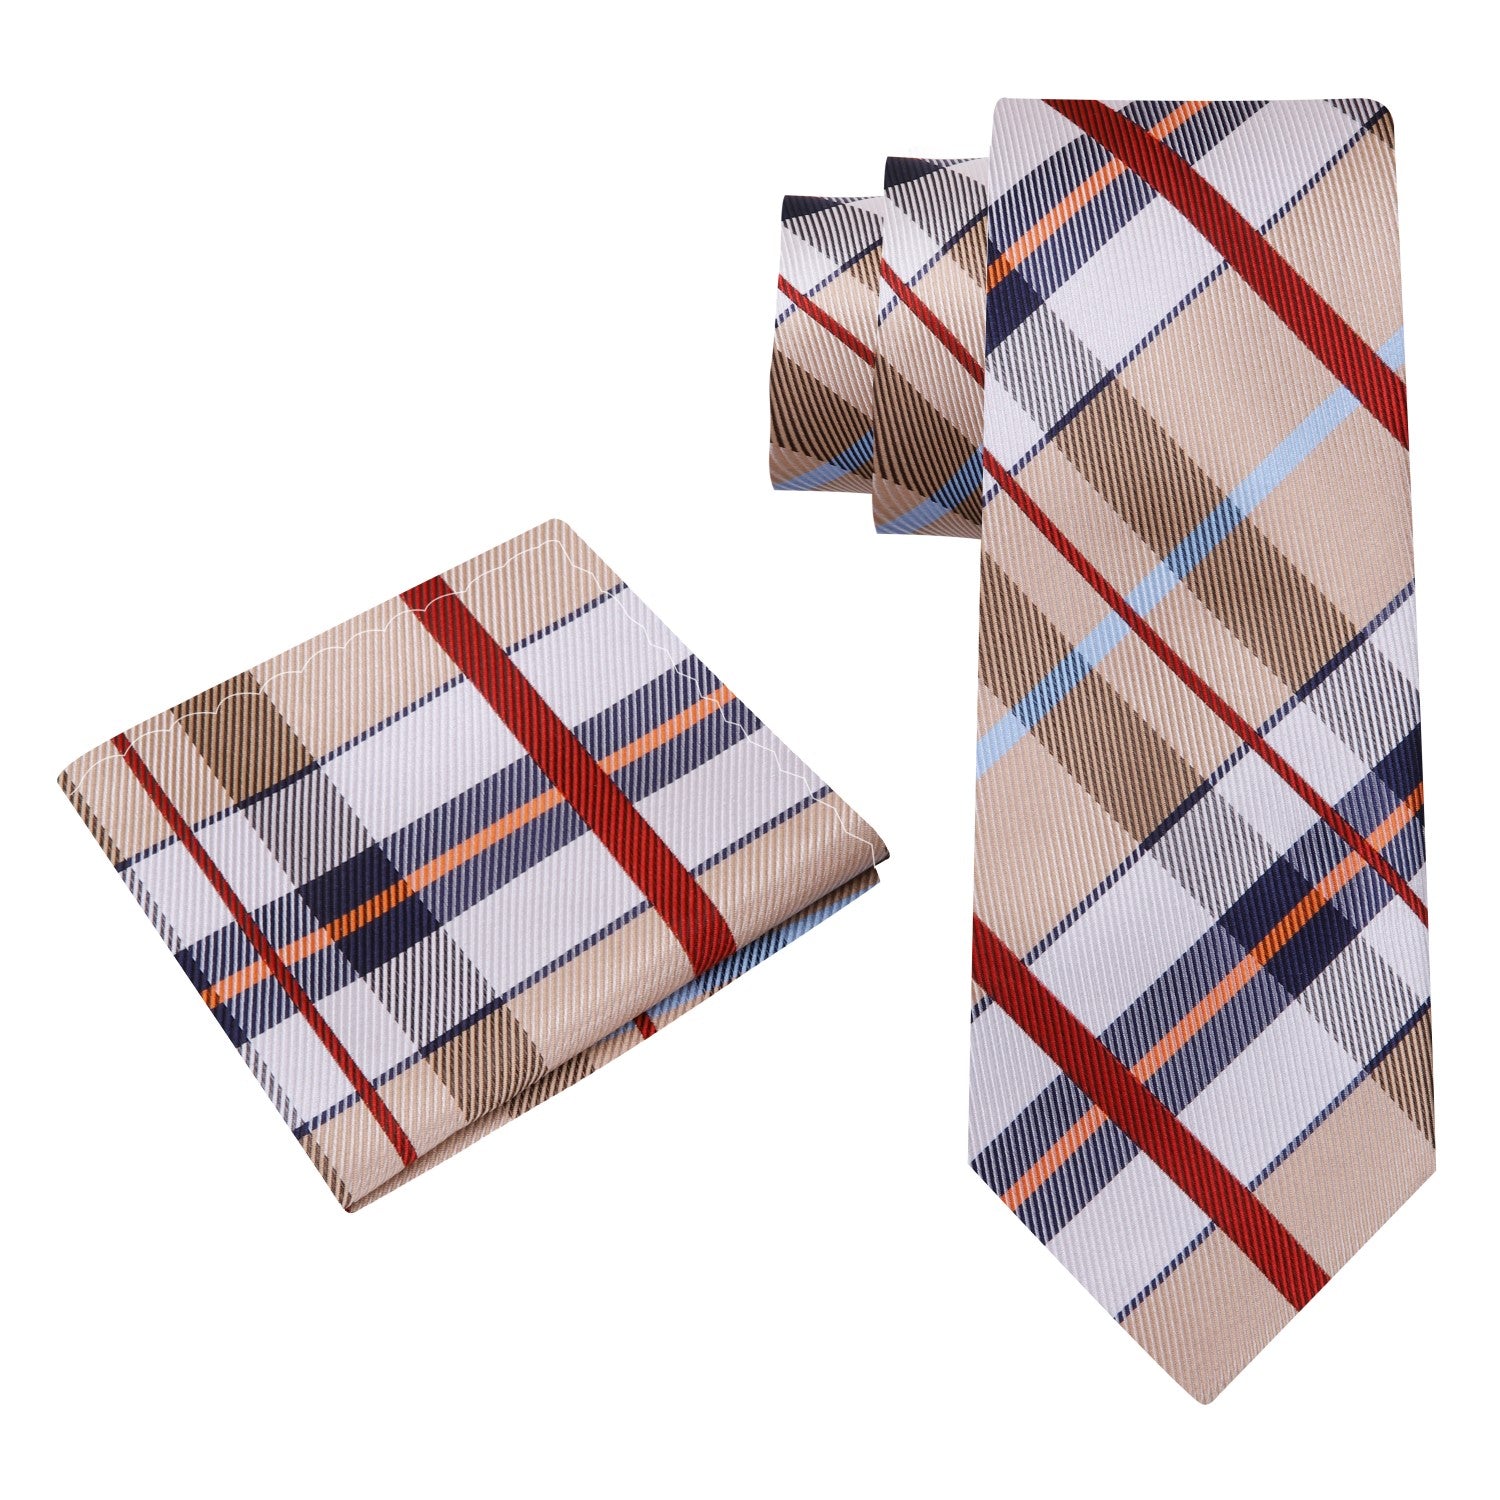 Alt View: light brown, red, blue plaid tie and square